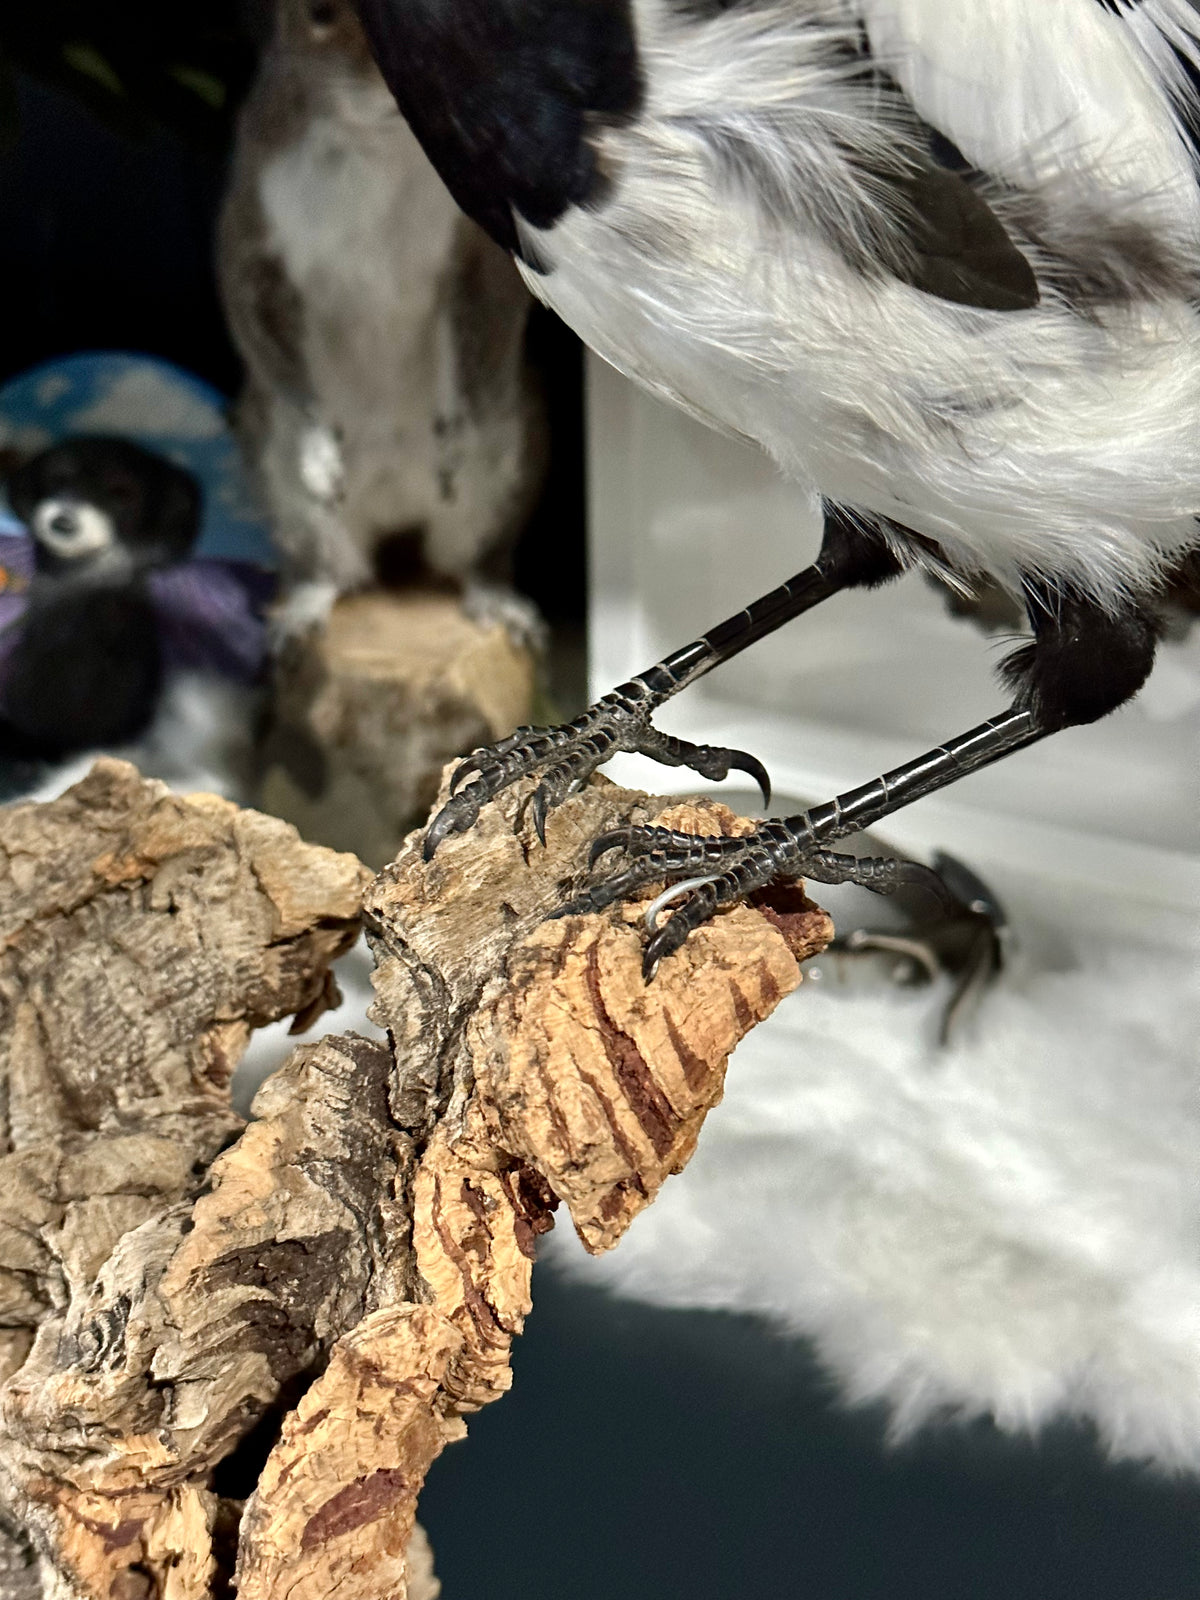 M & F Pica Pica / Eurasian Magpie Taxidermy Display | PICK UP ONLY